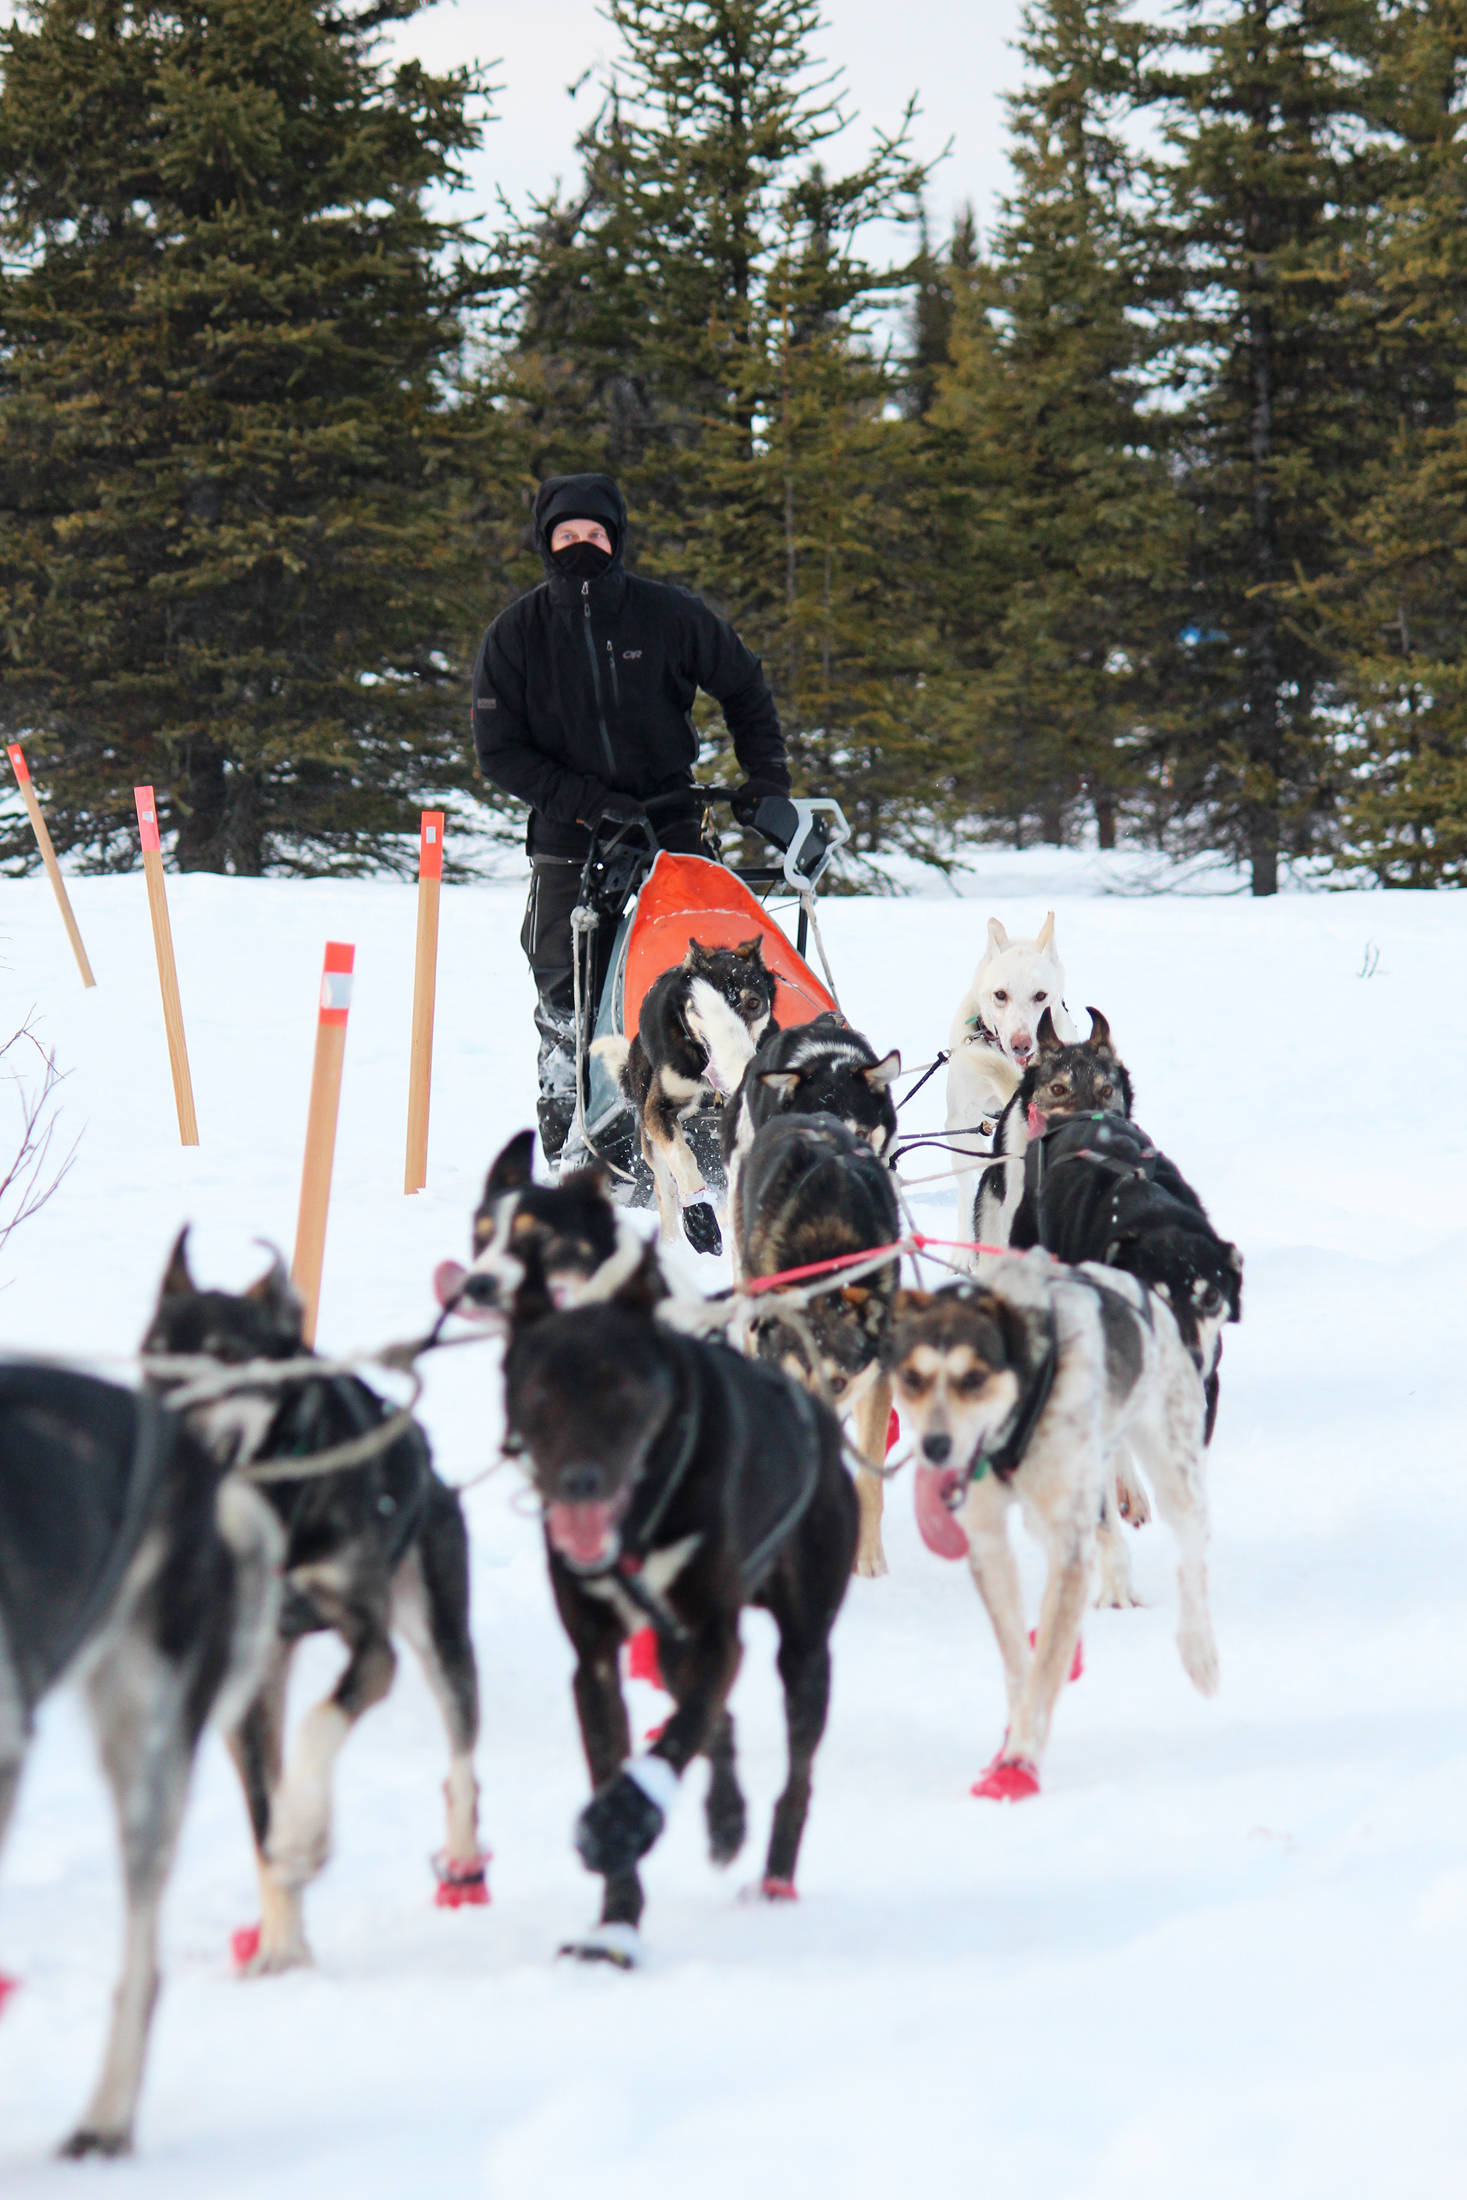 Musher Dave Turner and his dog team arrive at the first checkpoint of this year’s Tustumena 200 Sled Dog Race on Saturday, Jan. 26, 2019 at McNeil Canyon Elementary School near Homer, Alaska. (Photo by Megan Pacer/Homer News)